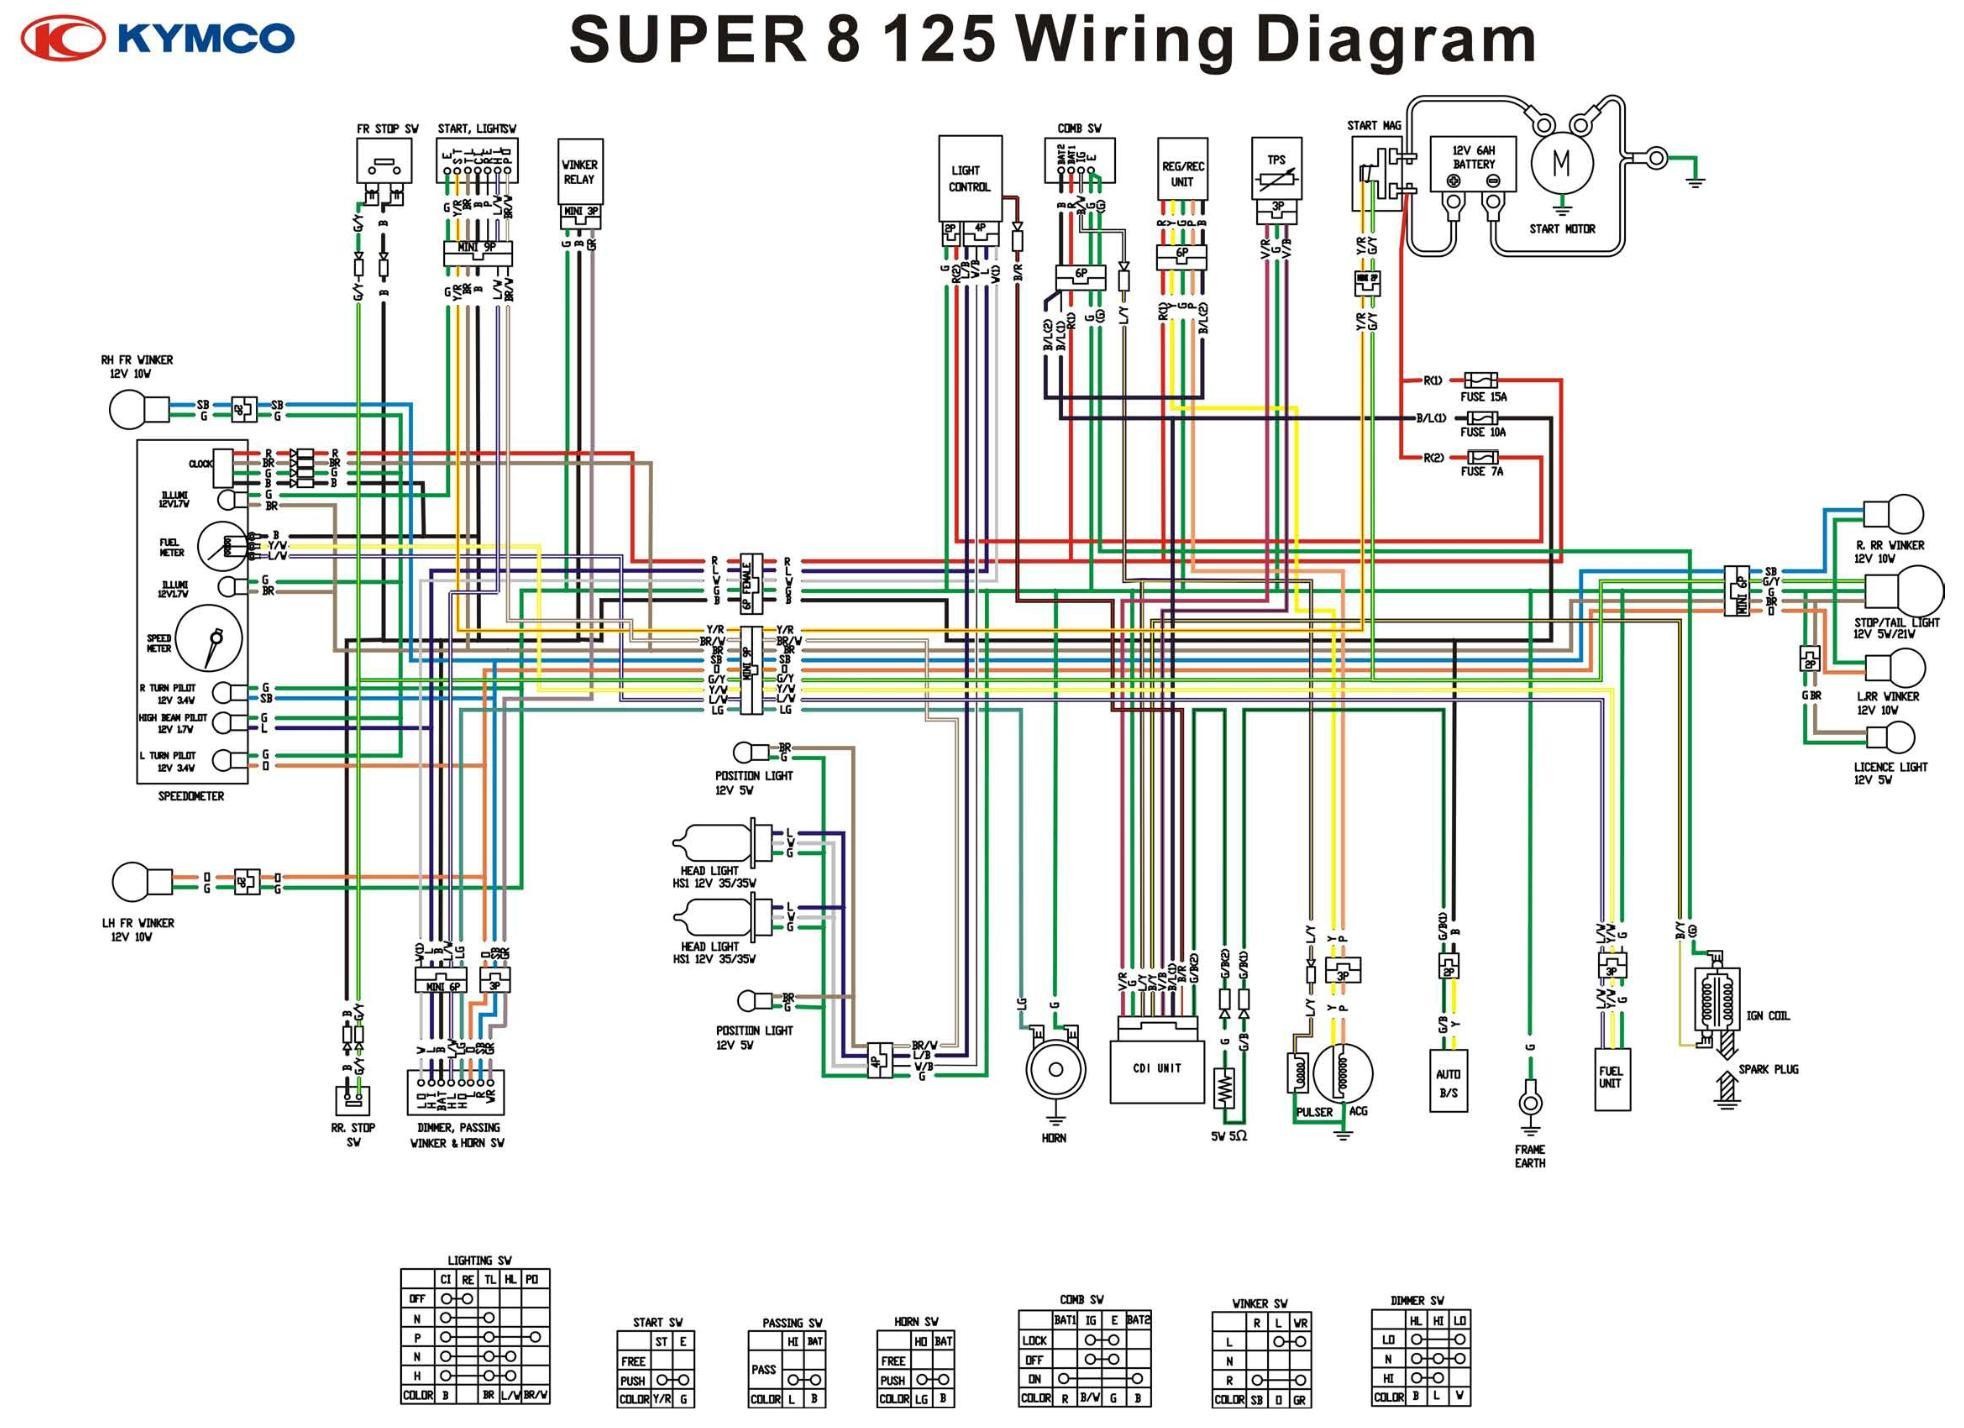 Break Away Systems Wiring Diagram Kymco Super 8 125 Wiring Circuit Diagrams with Agility 50 Diagram Of Break Away Systems Wiring Diagram